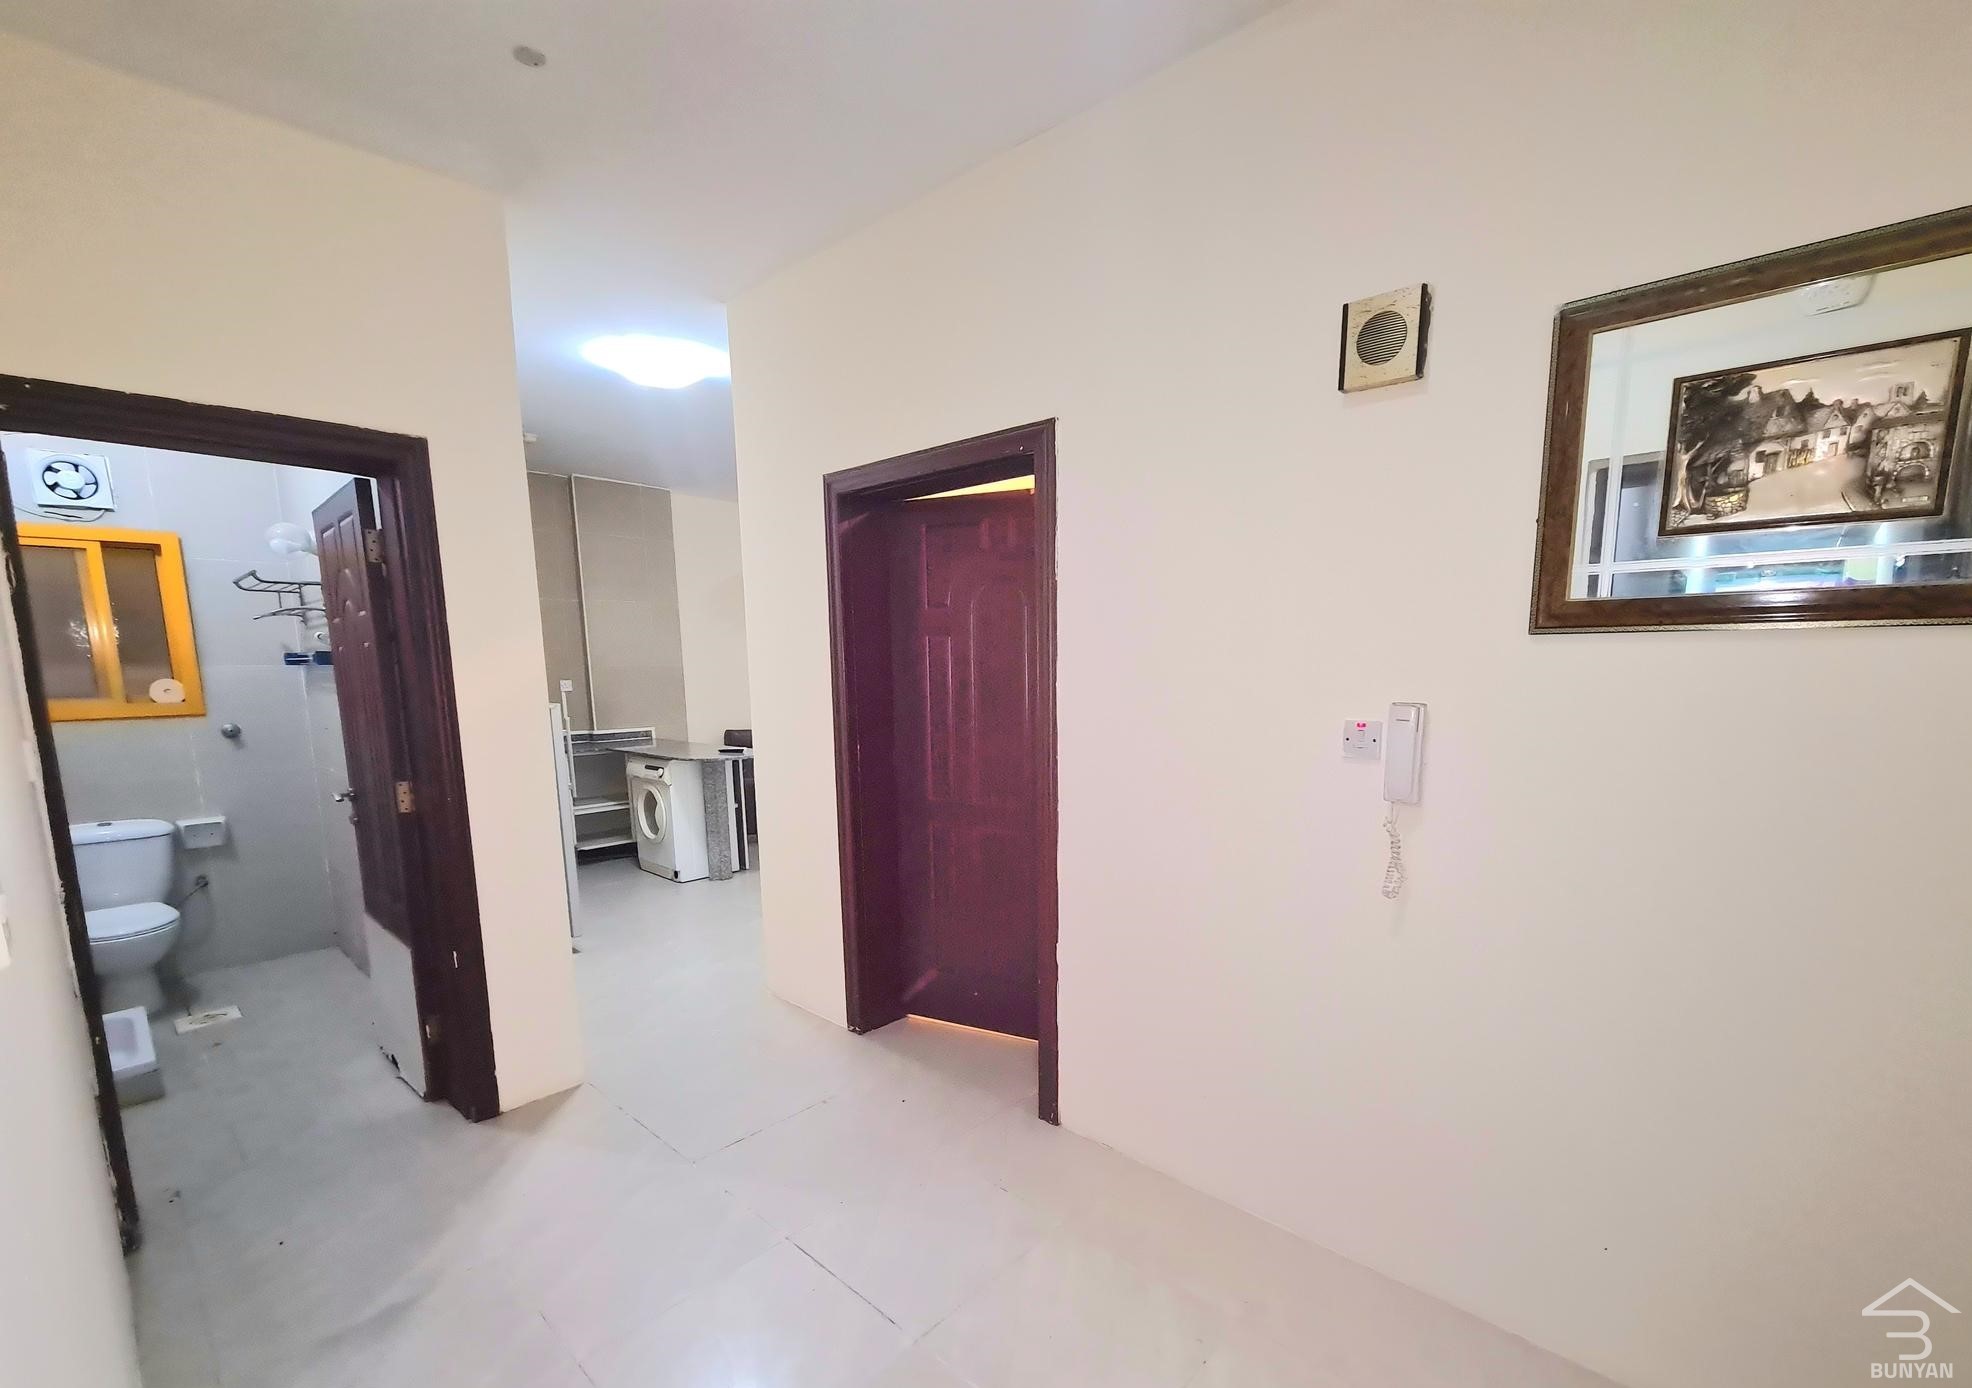 1 BHK FULLY FURNISHED APARTMENT 3500 INCLUDING WIFI